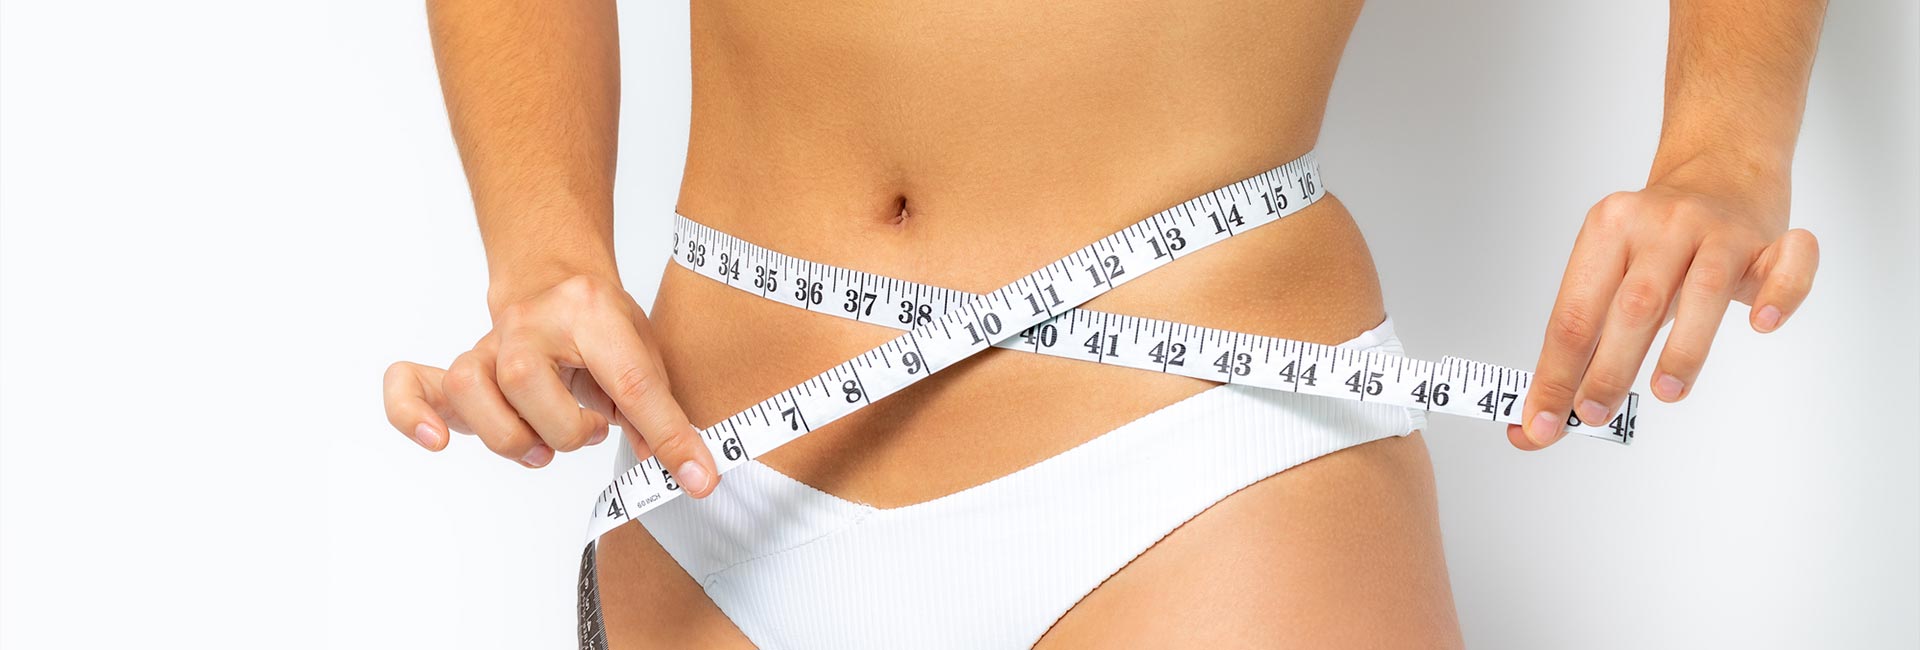 Fat Removal & Body Contouring